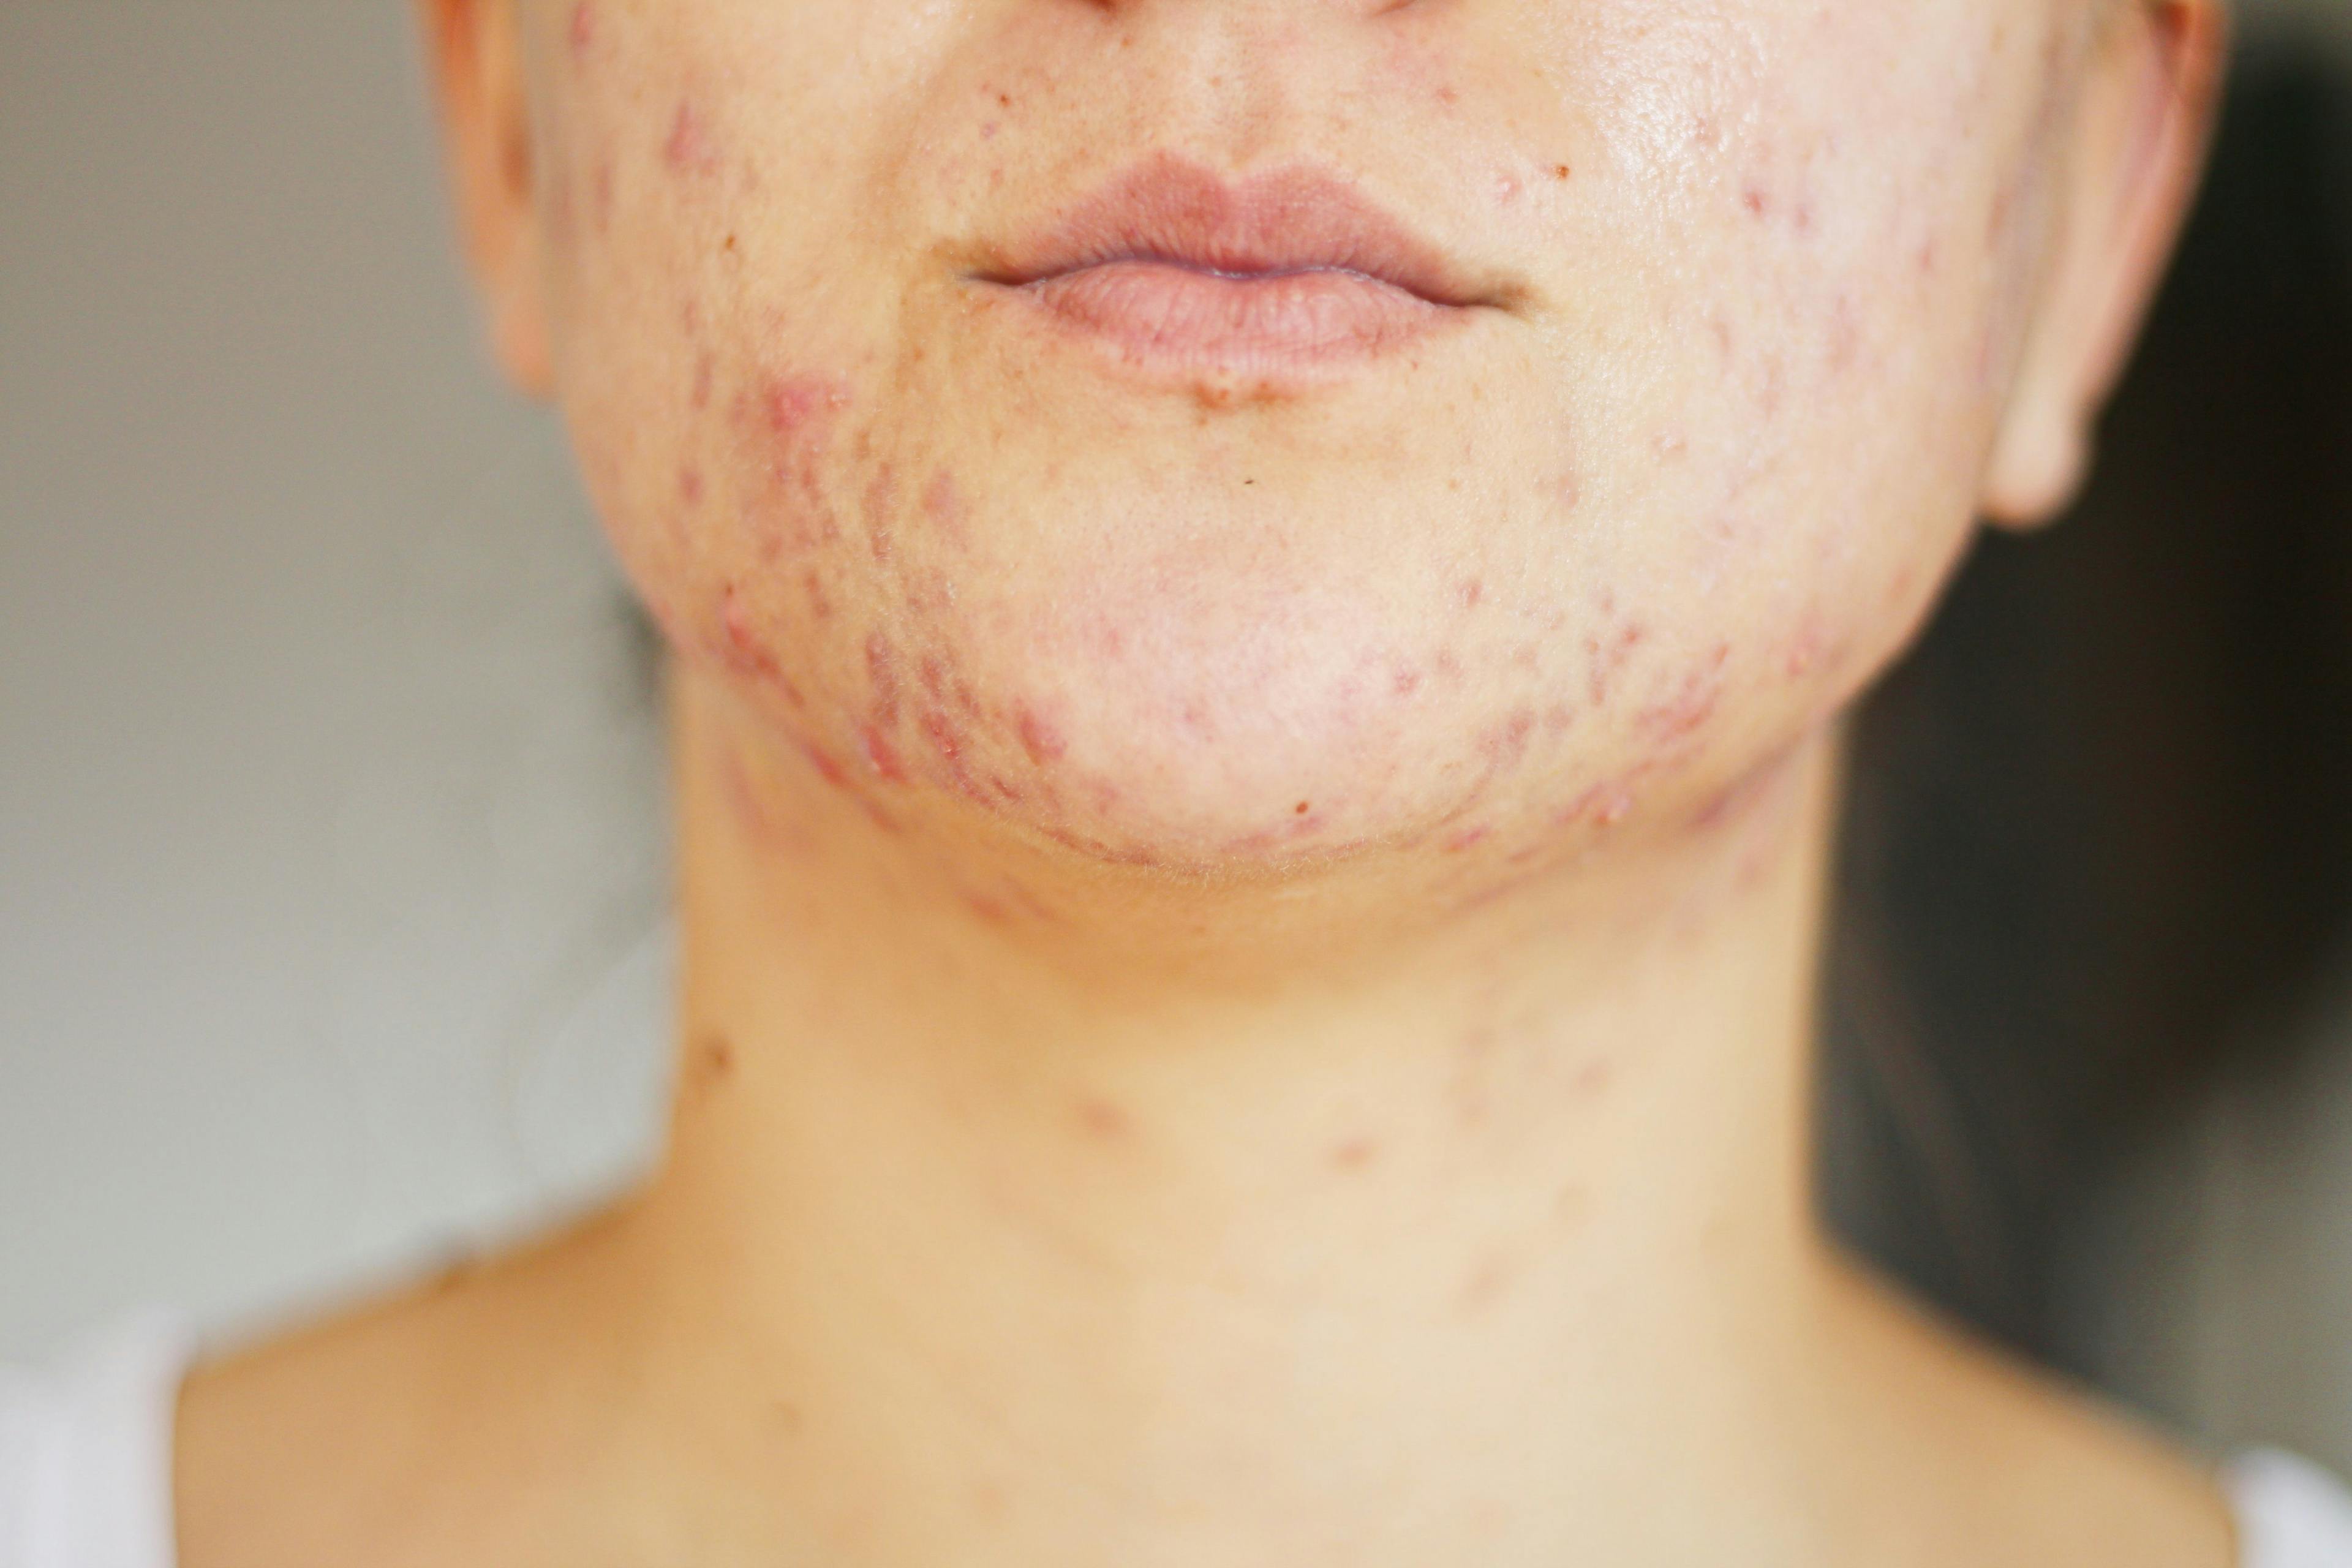 Compound Glycyrrhizin Injections More Efficacious in Acne Than Clindamycin